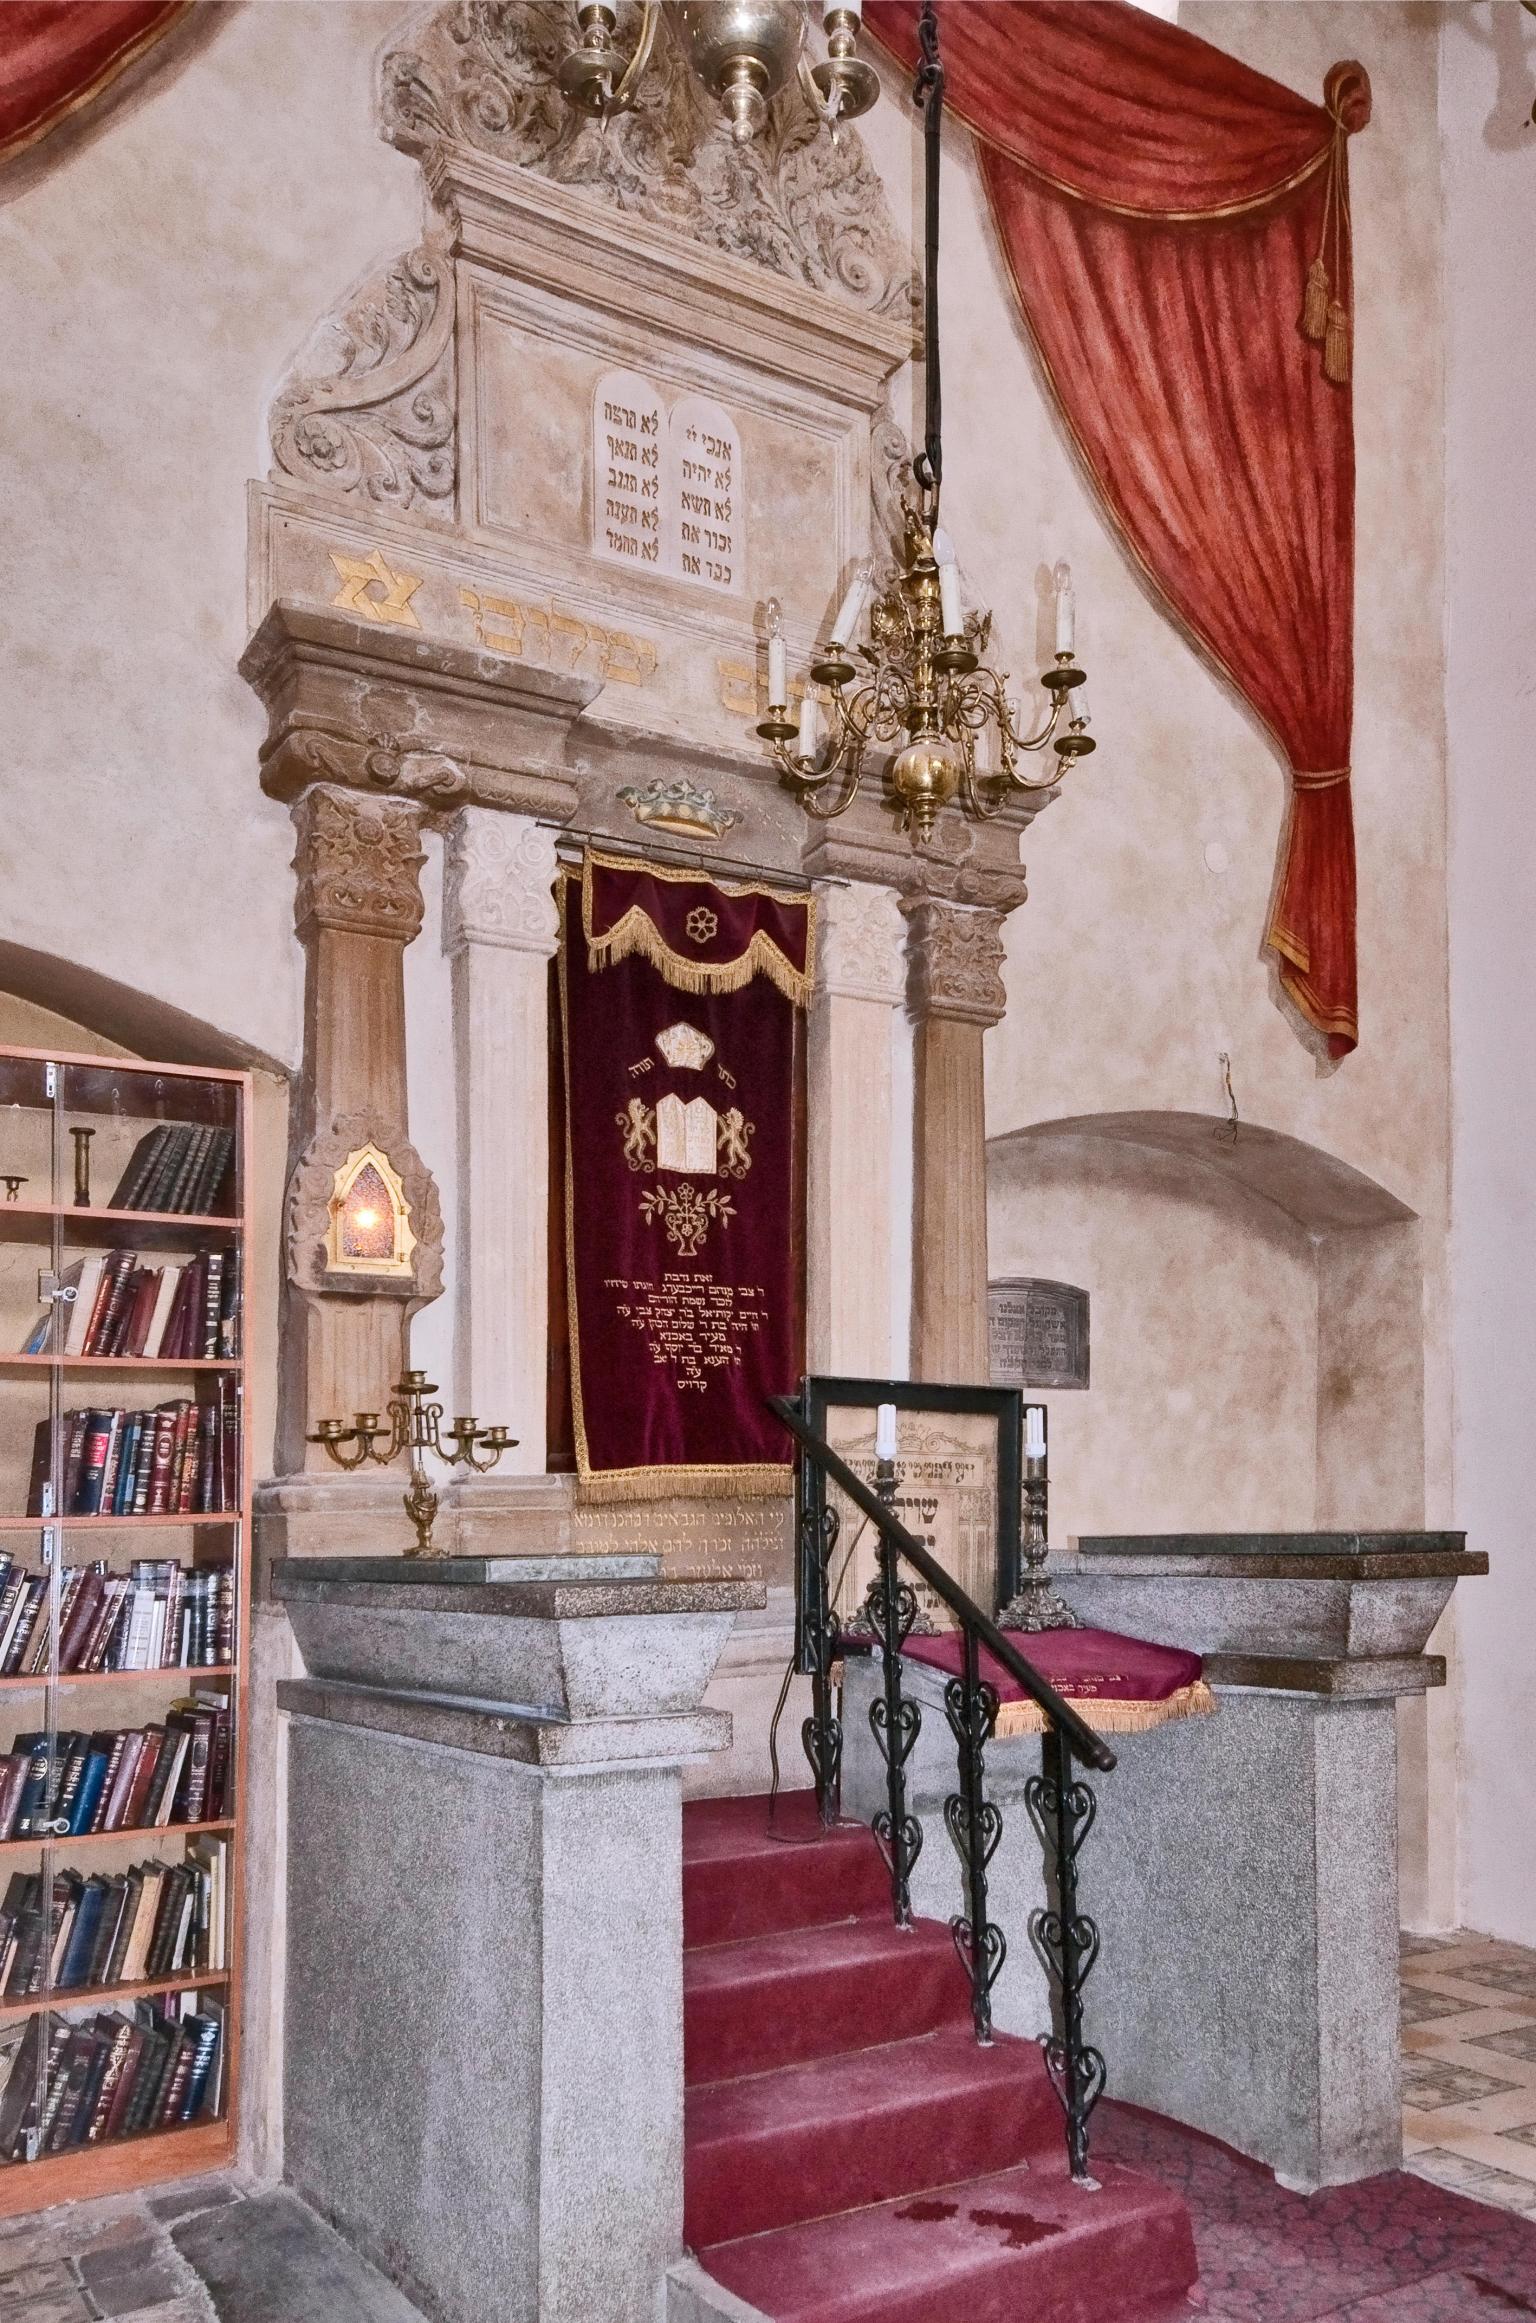 Photograph of Torah ark built into stone wall and covered with cloth, with small staircase in front and bookshelf to the left.